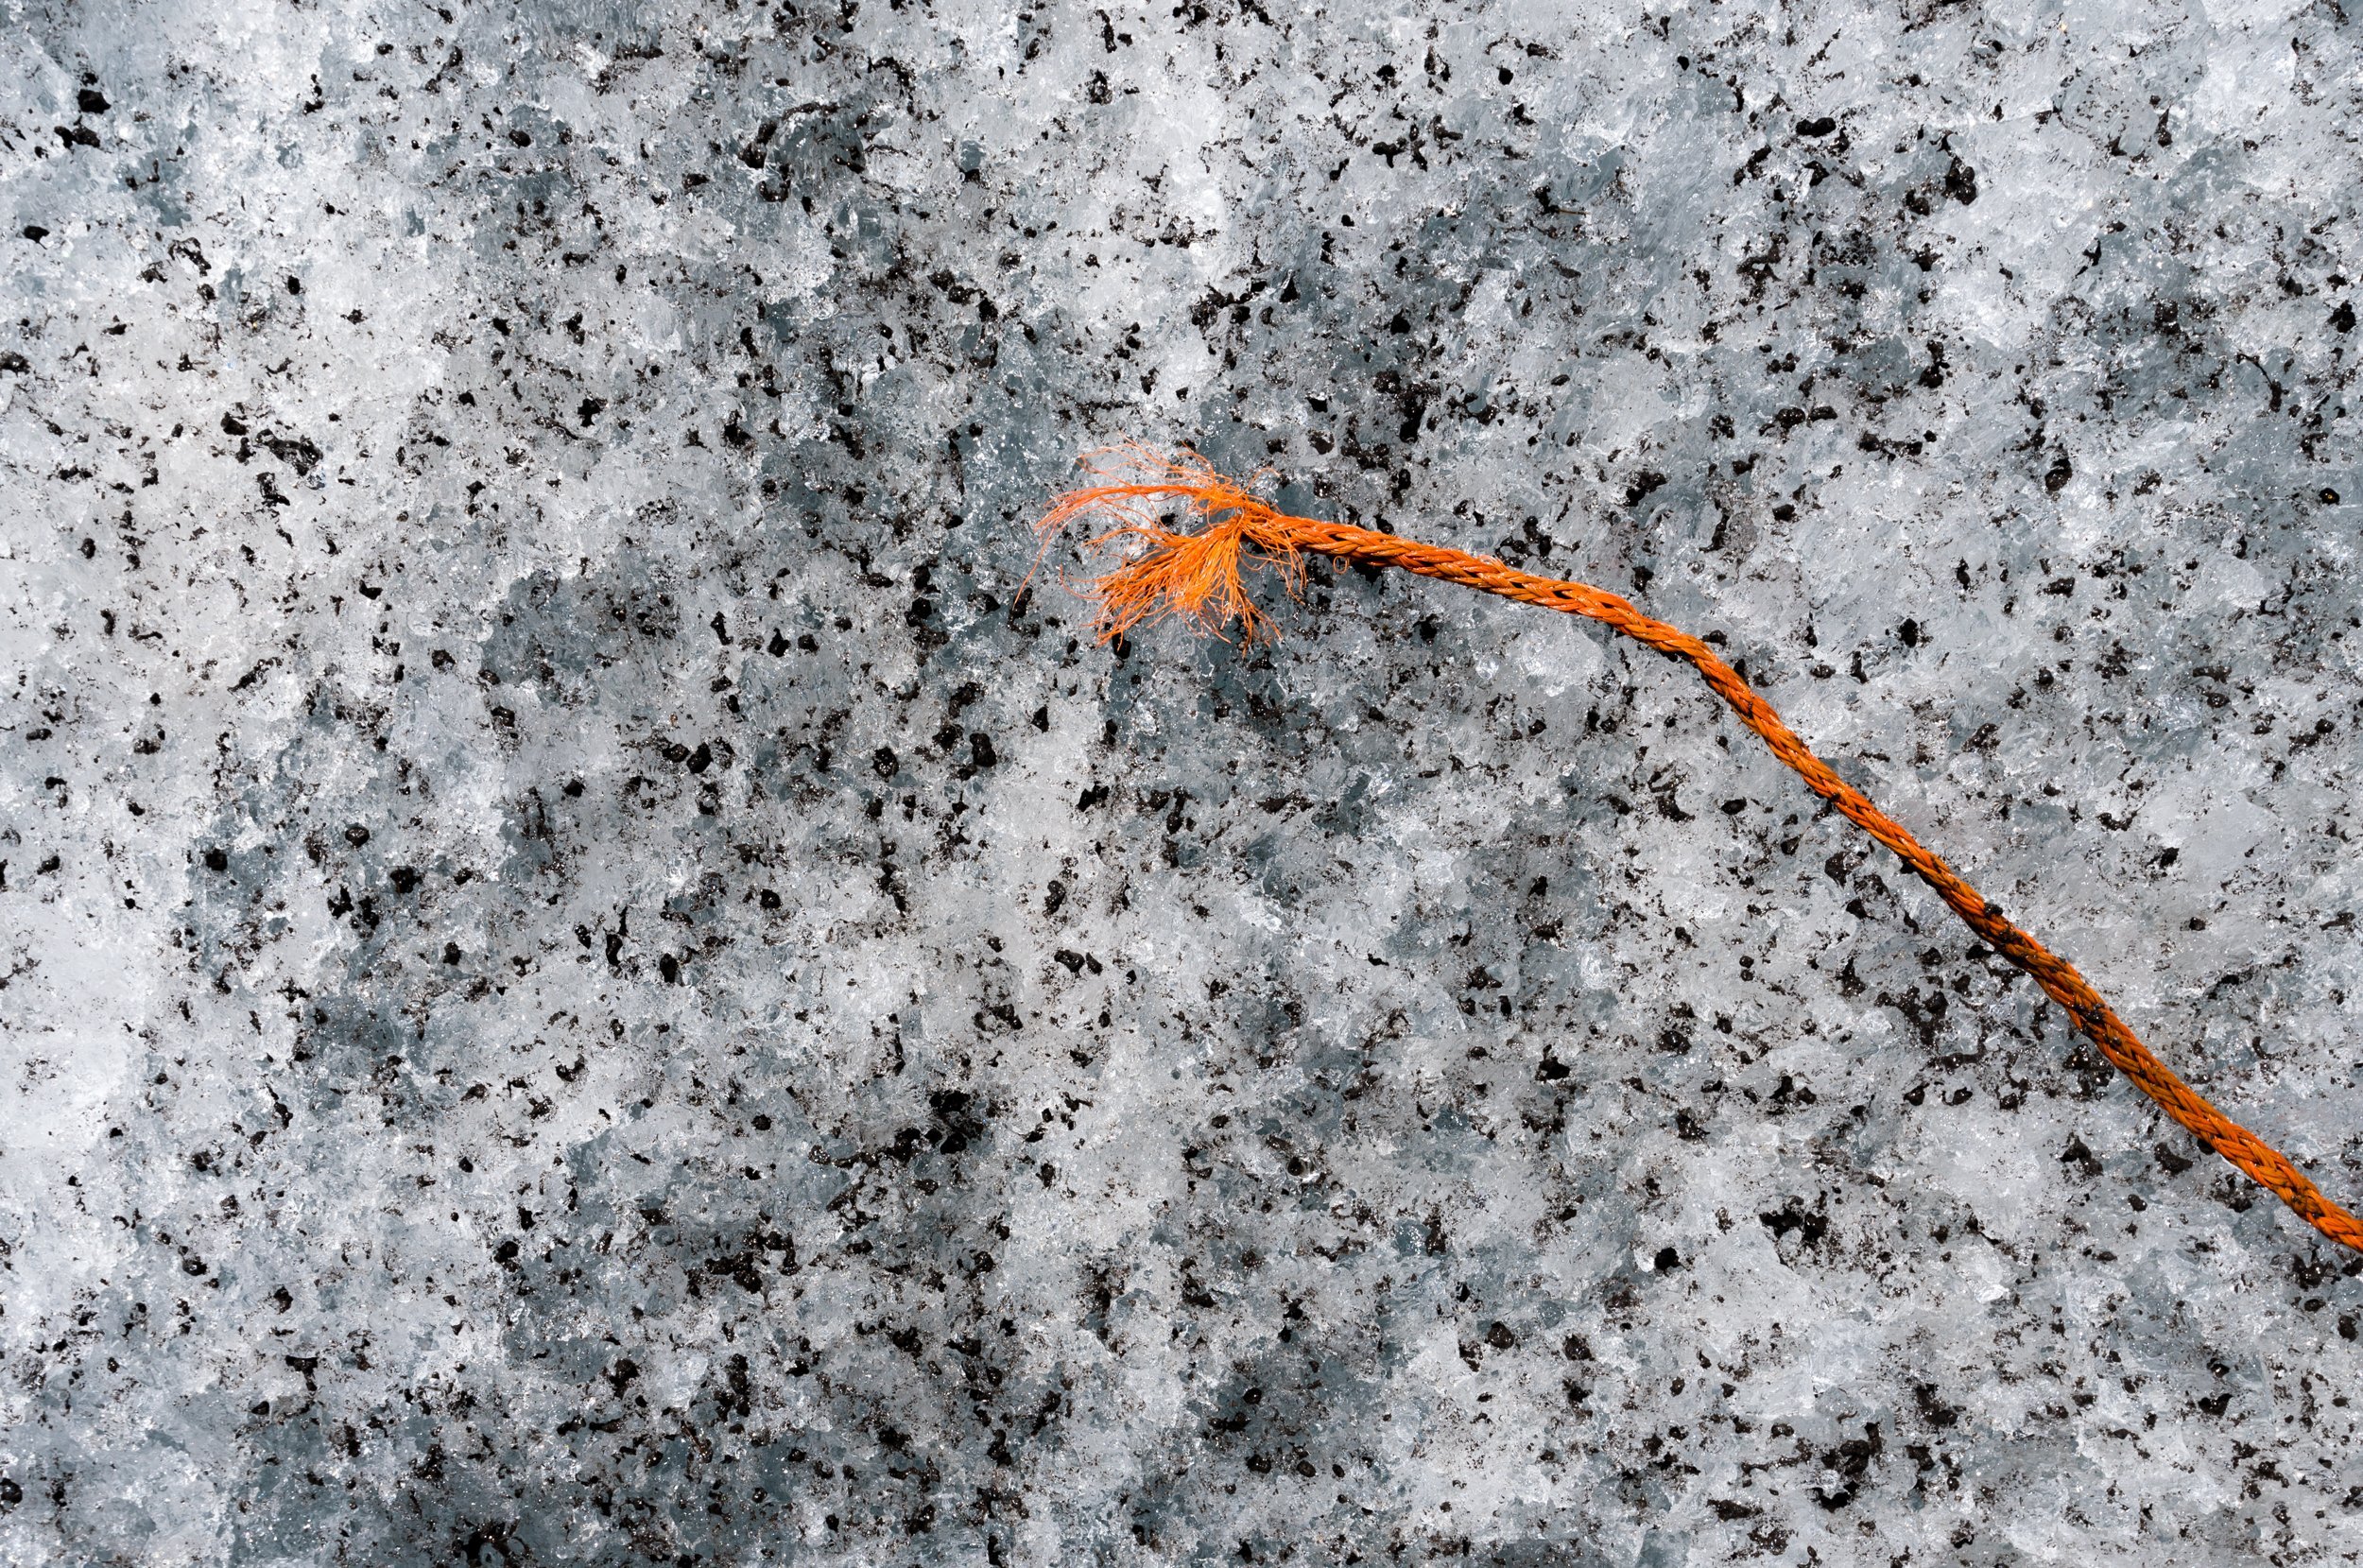 Cord on icy ground